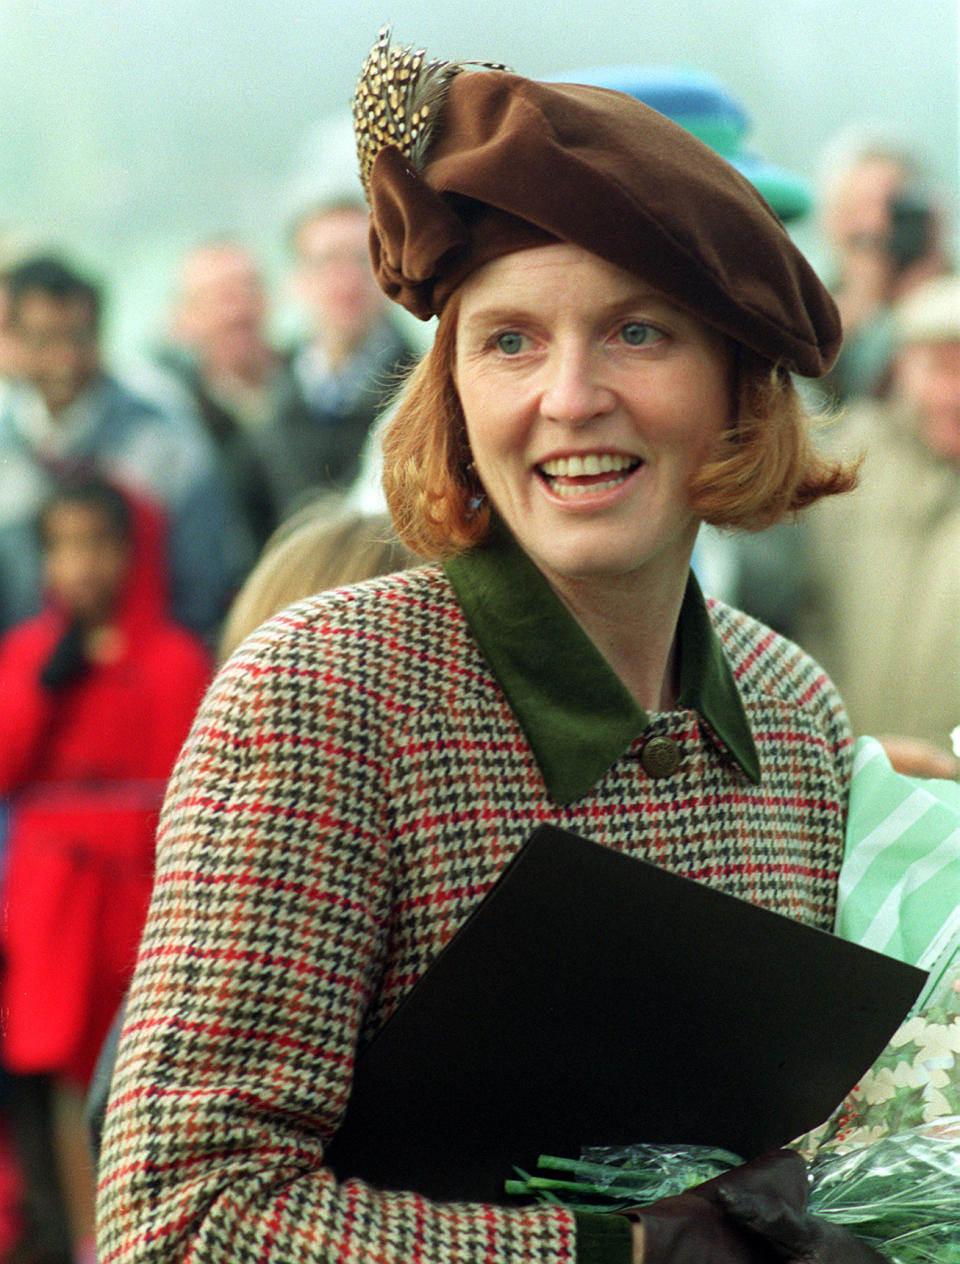 The 59-year-old, who is mum to Princess Beatrice and Princess Eugenie, was married to the Queen’s son, Prince Andrew, from 1986 until 1992 and spent many Christmases shacked up at Sandringham. Photo: Getty Images